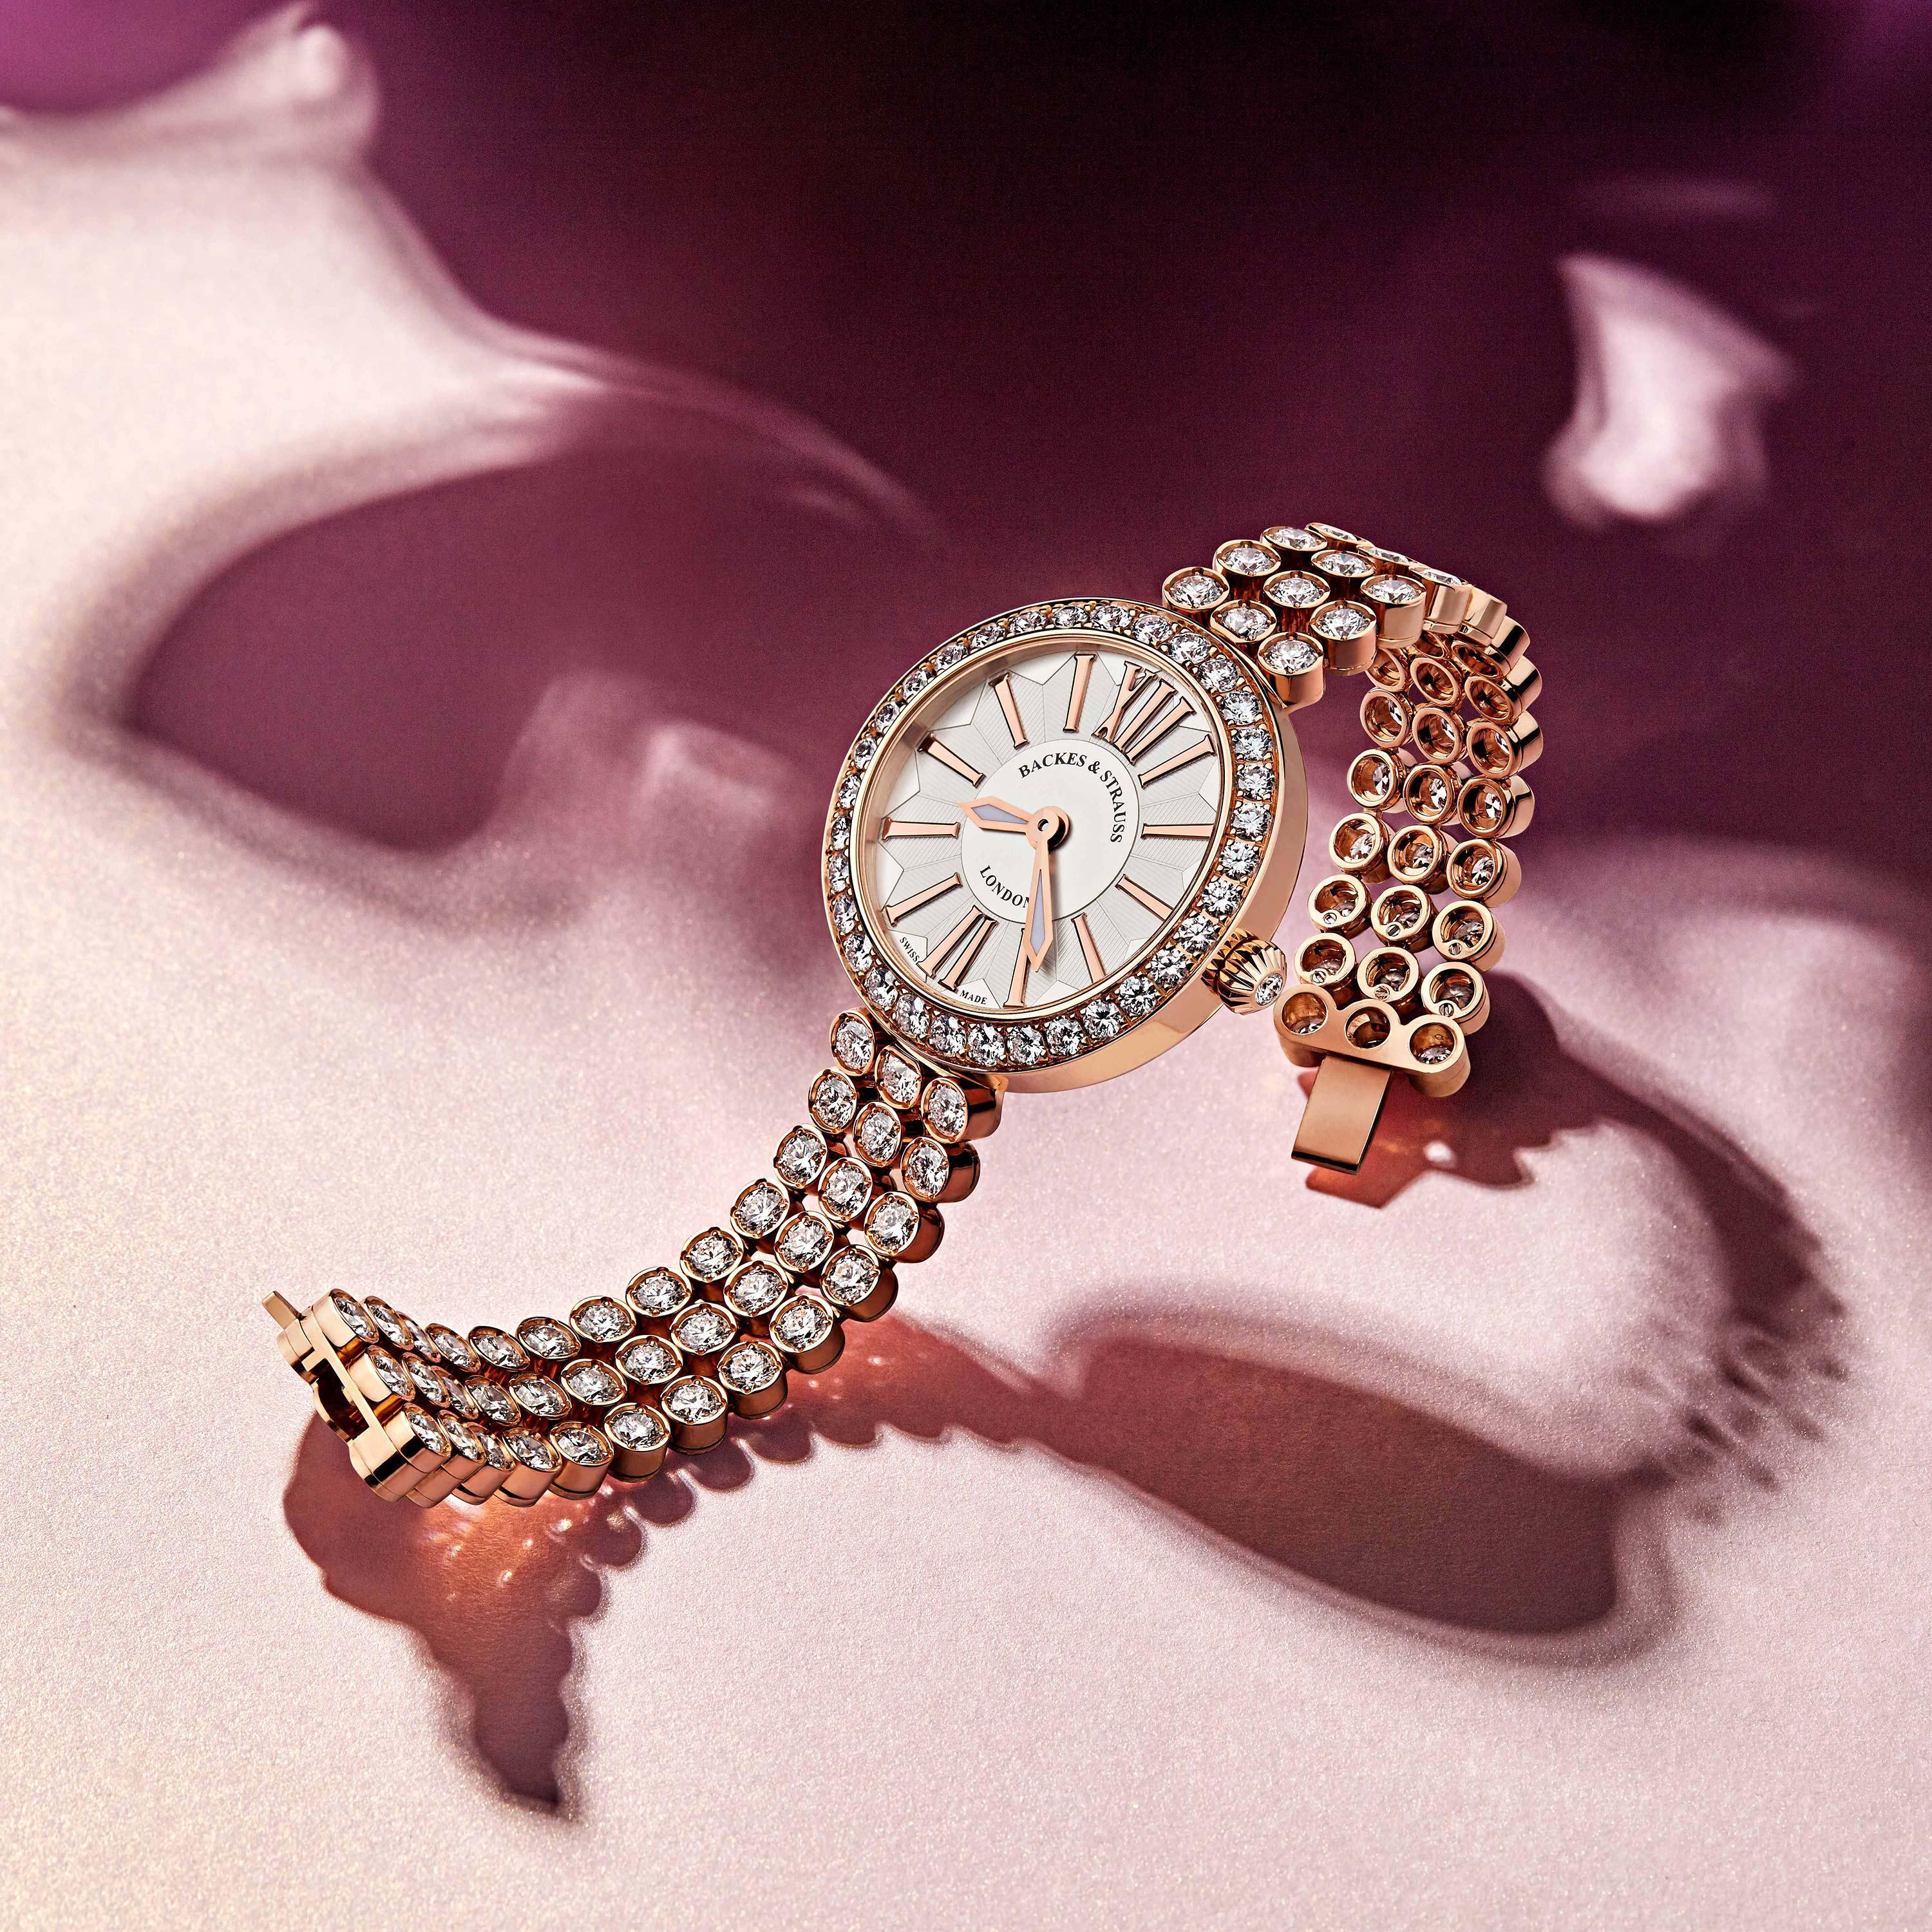 Piccadilly Duchess 33 is a luxury diamond watch for women crafted in 18kt Rose gold, featuring the round mother-of-pearl dial with the rose gold roman numerals, quartz movement. The case, dial and the crown are set with white Ideal Cut diamonds. It